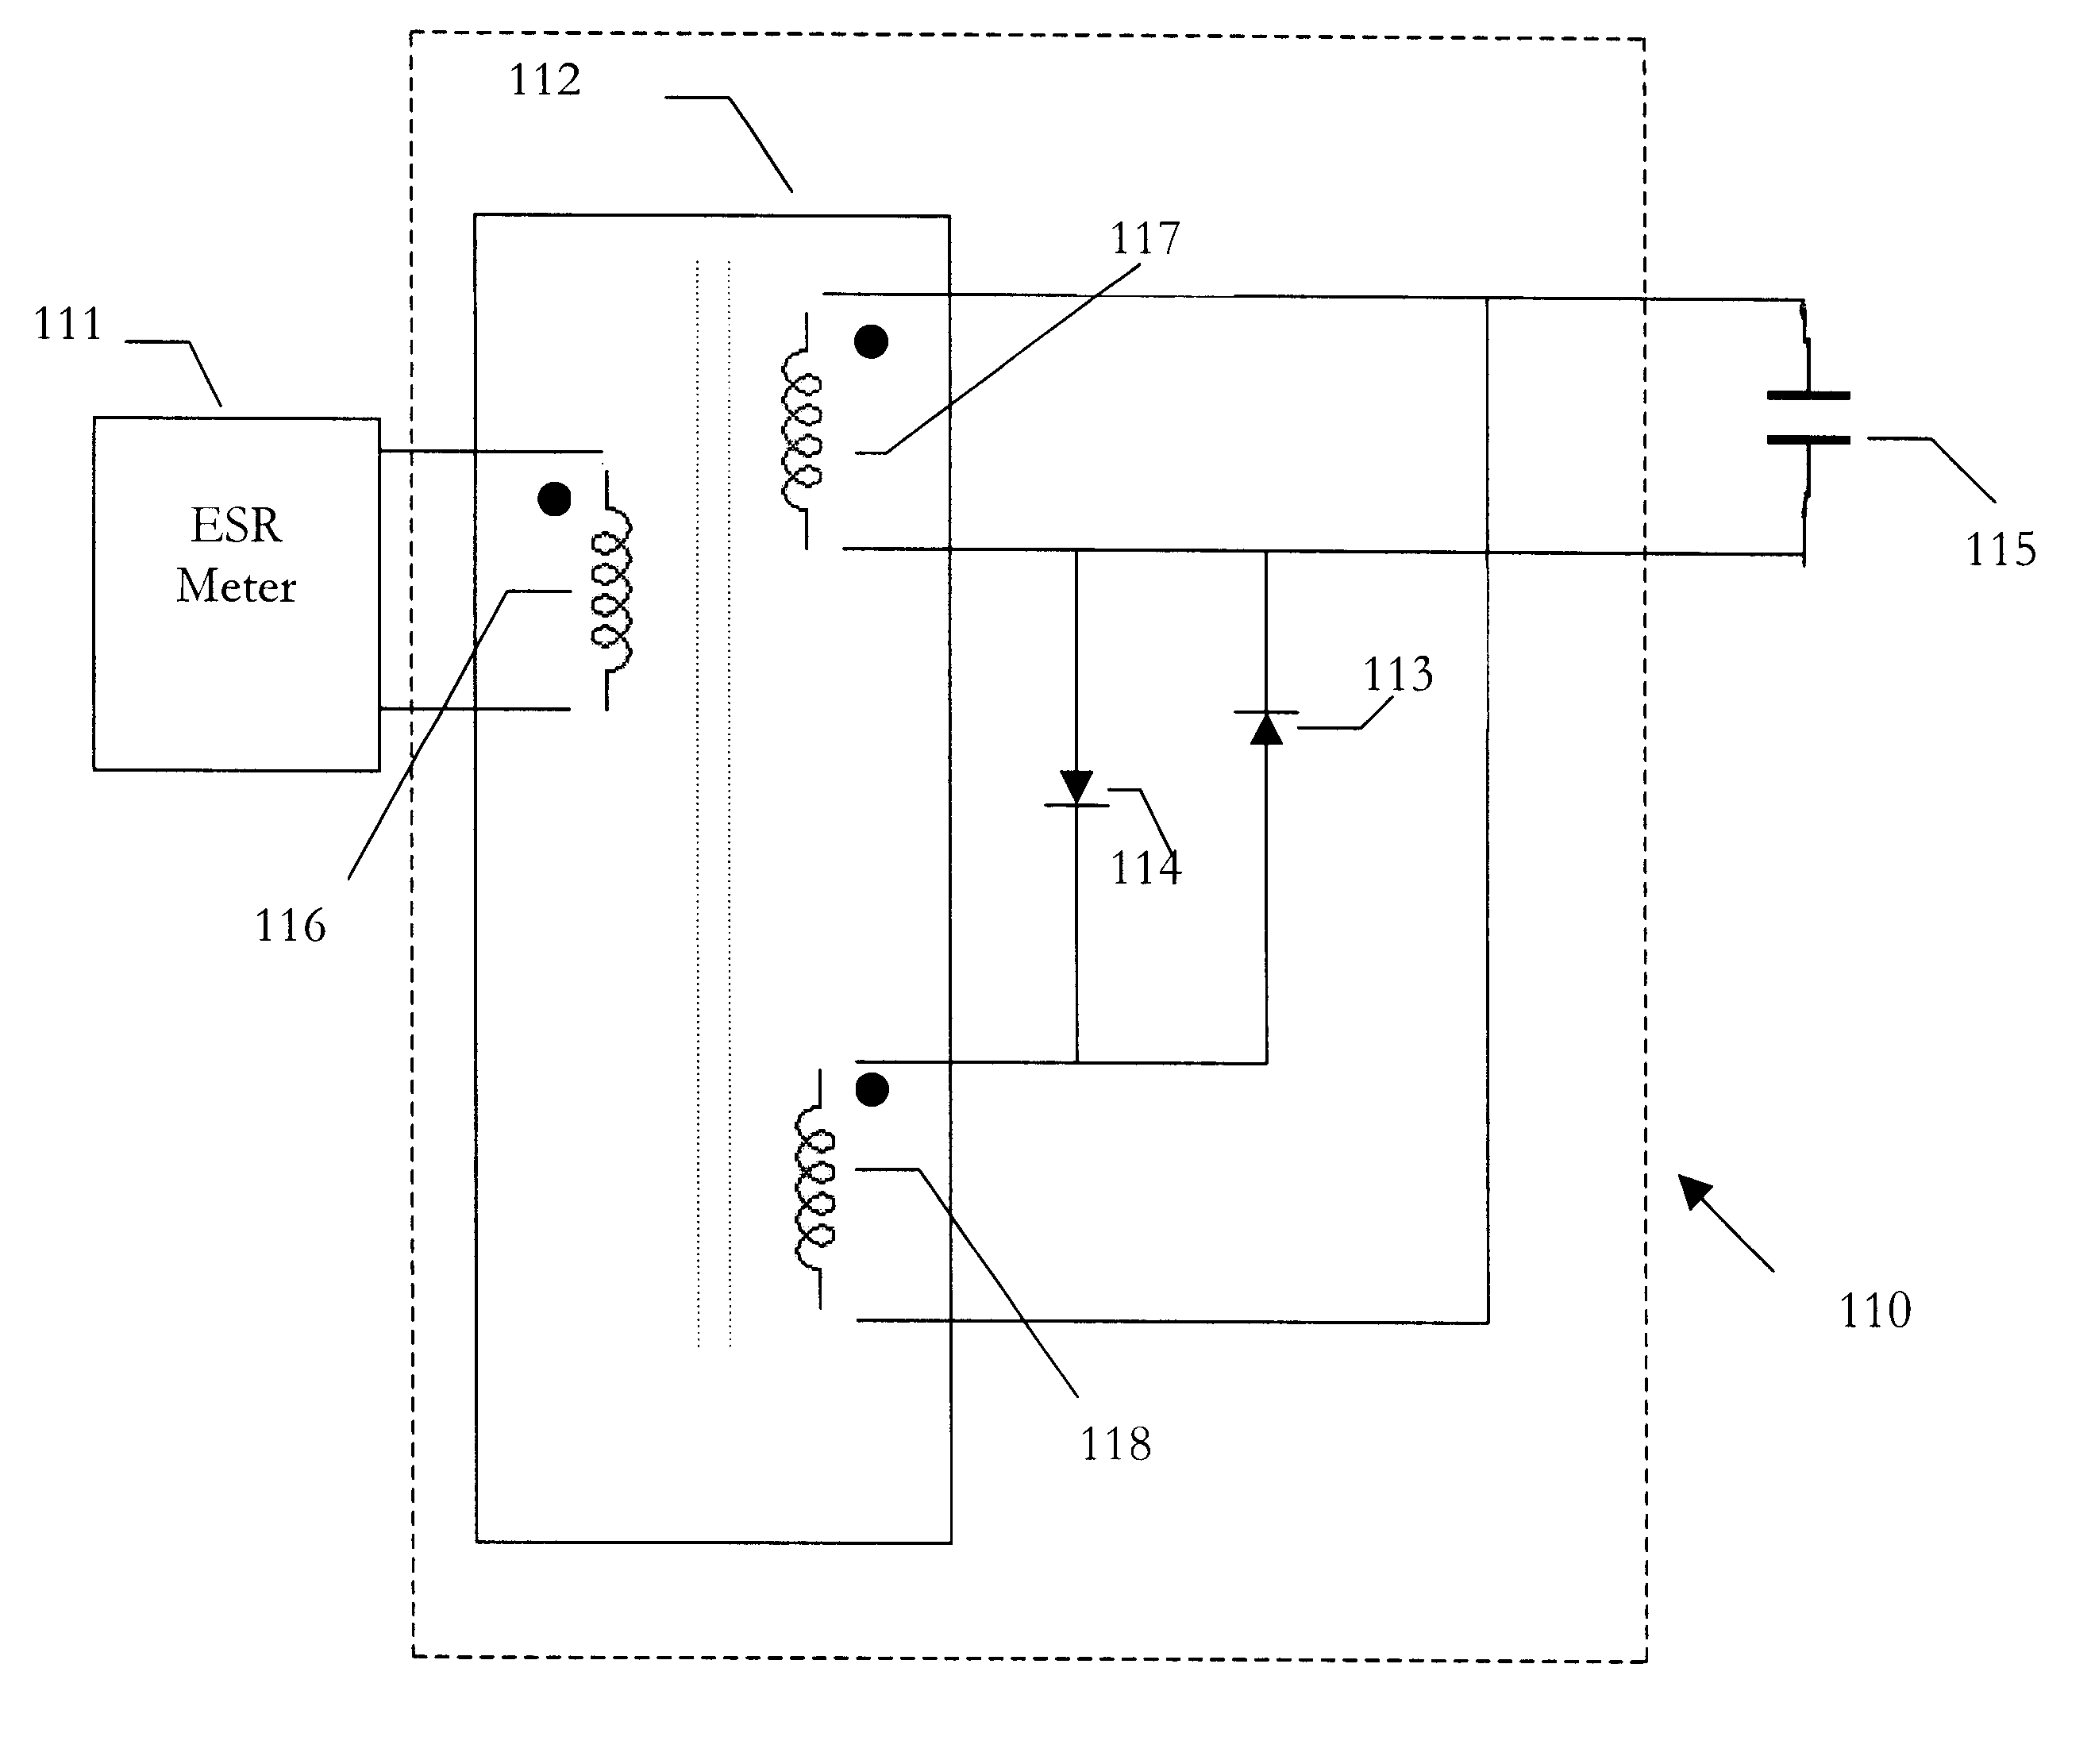 System for protecting electronic test equipment from charged capacitors